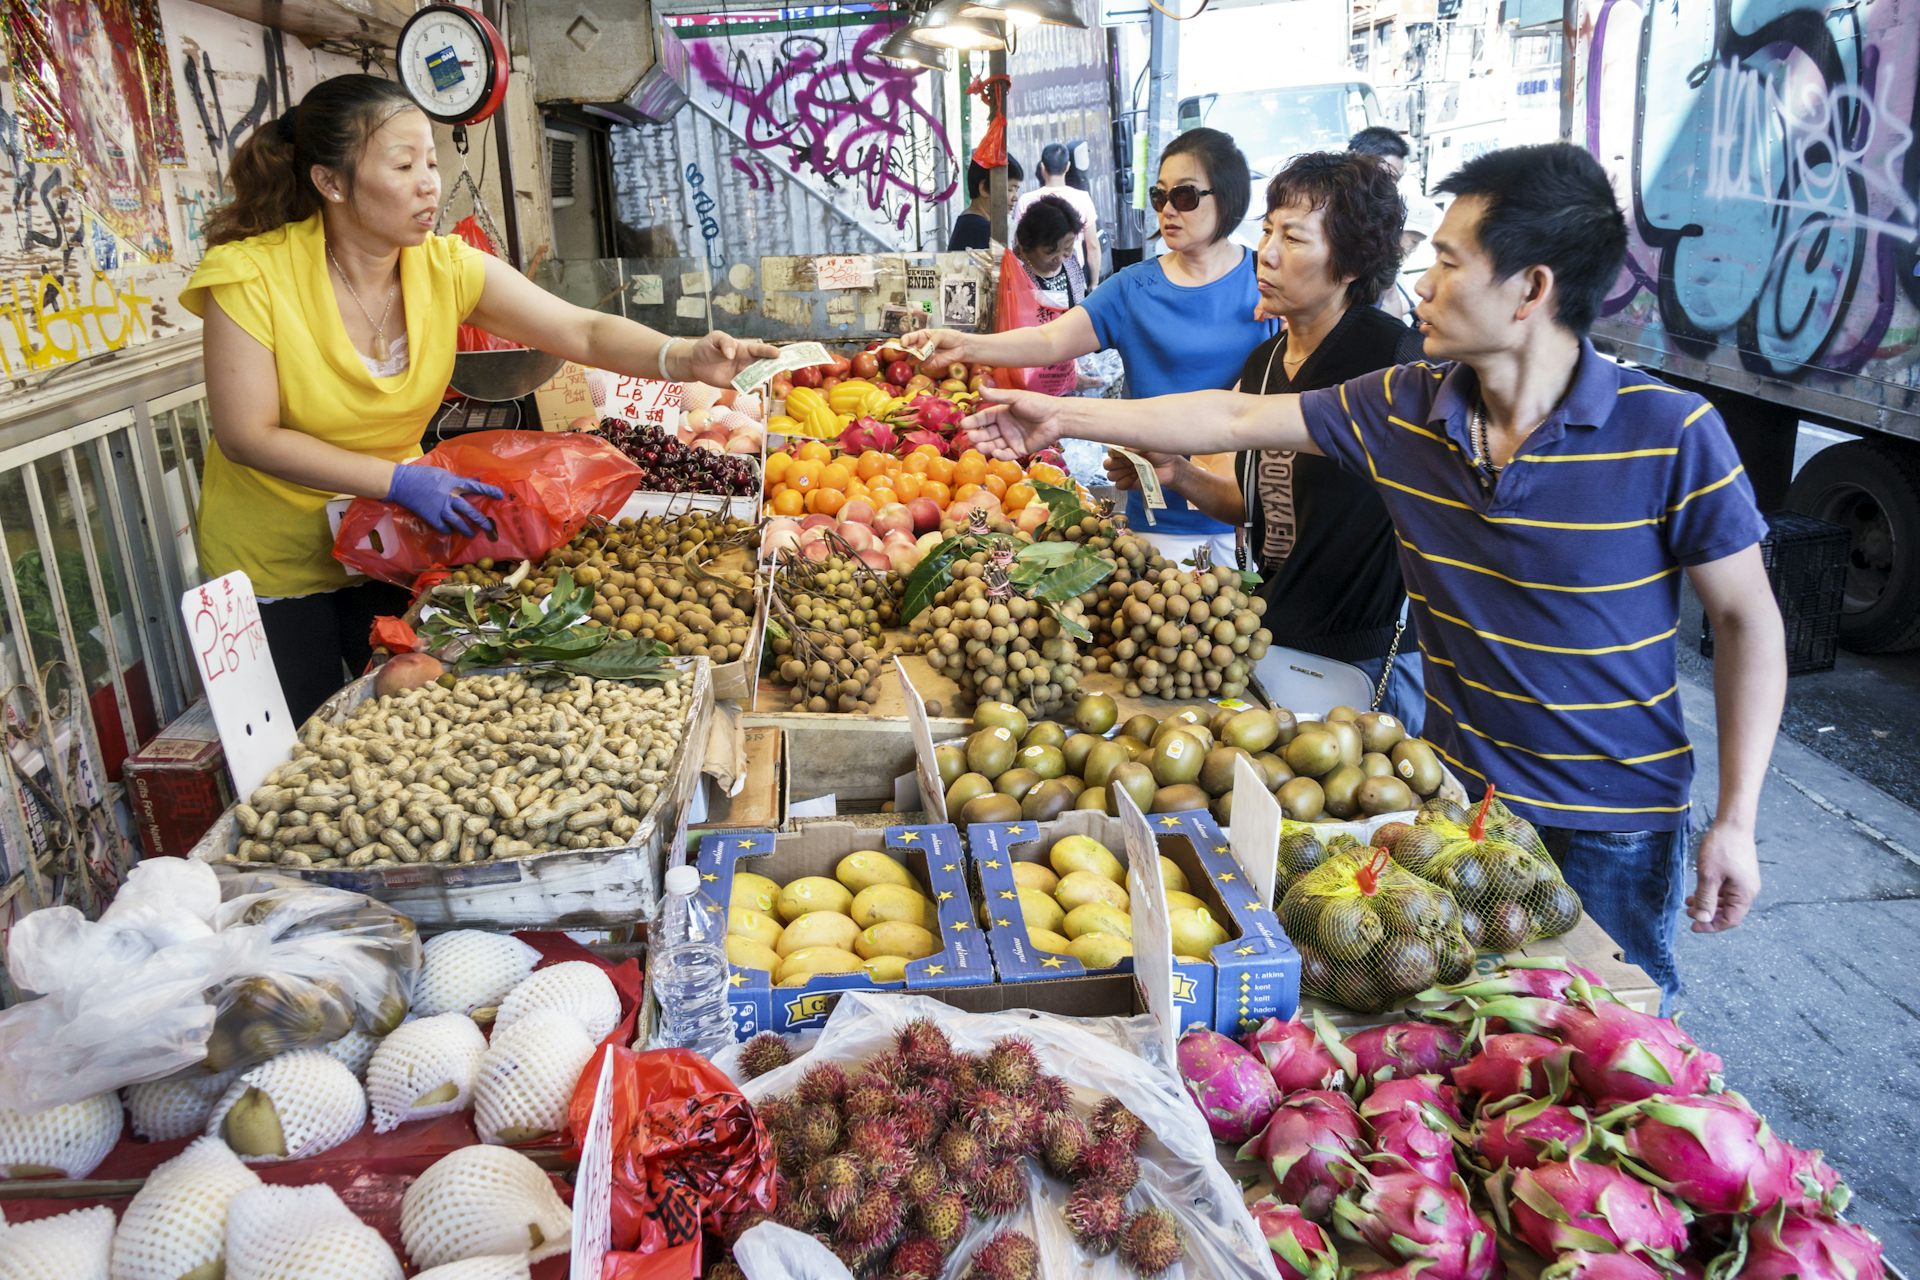 Asian woman hands change back to three Asian American customers, over a large outdoor fruit display